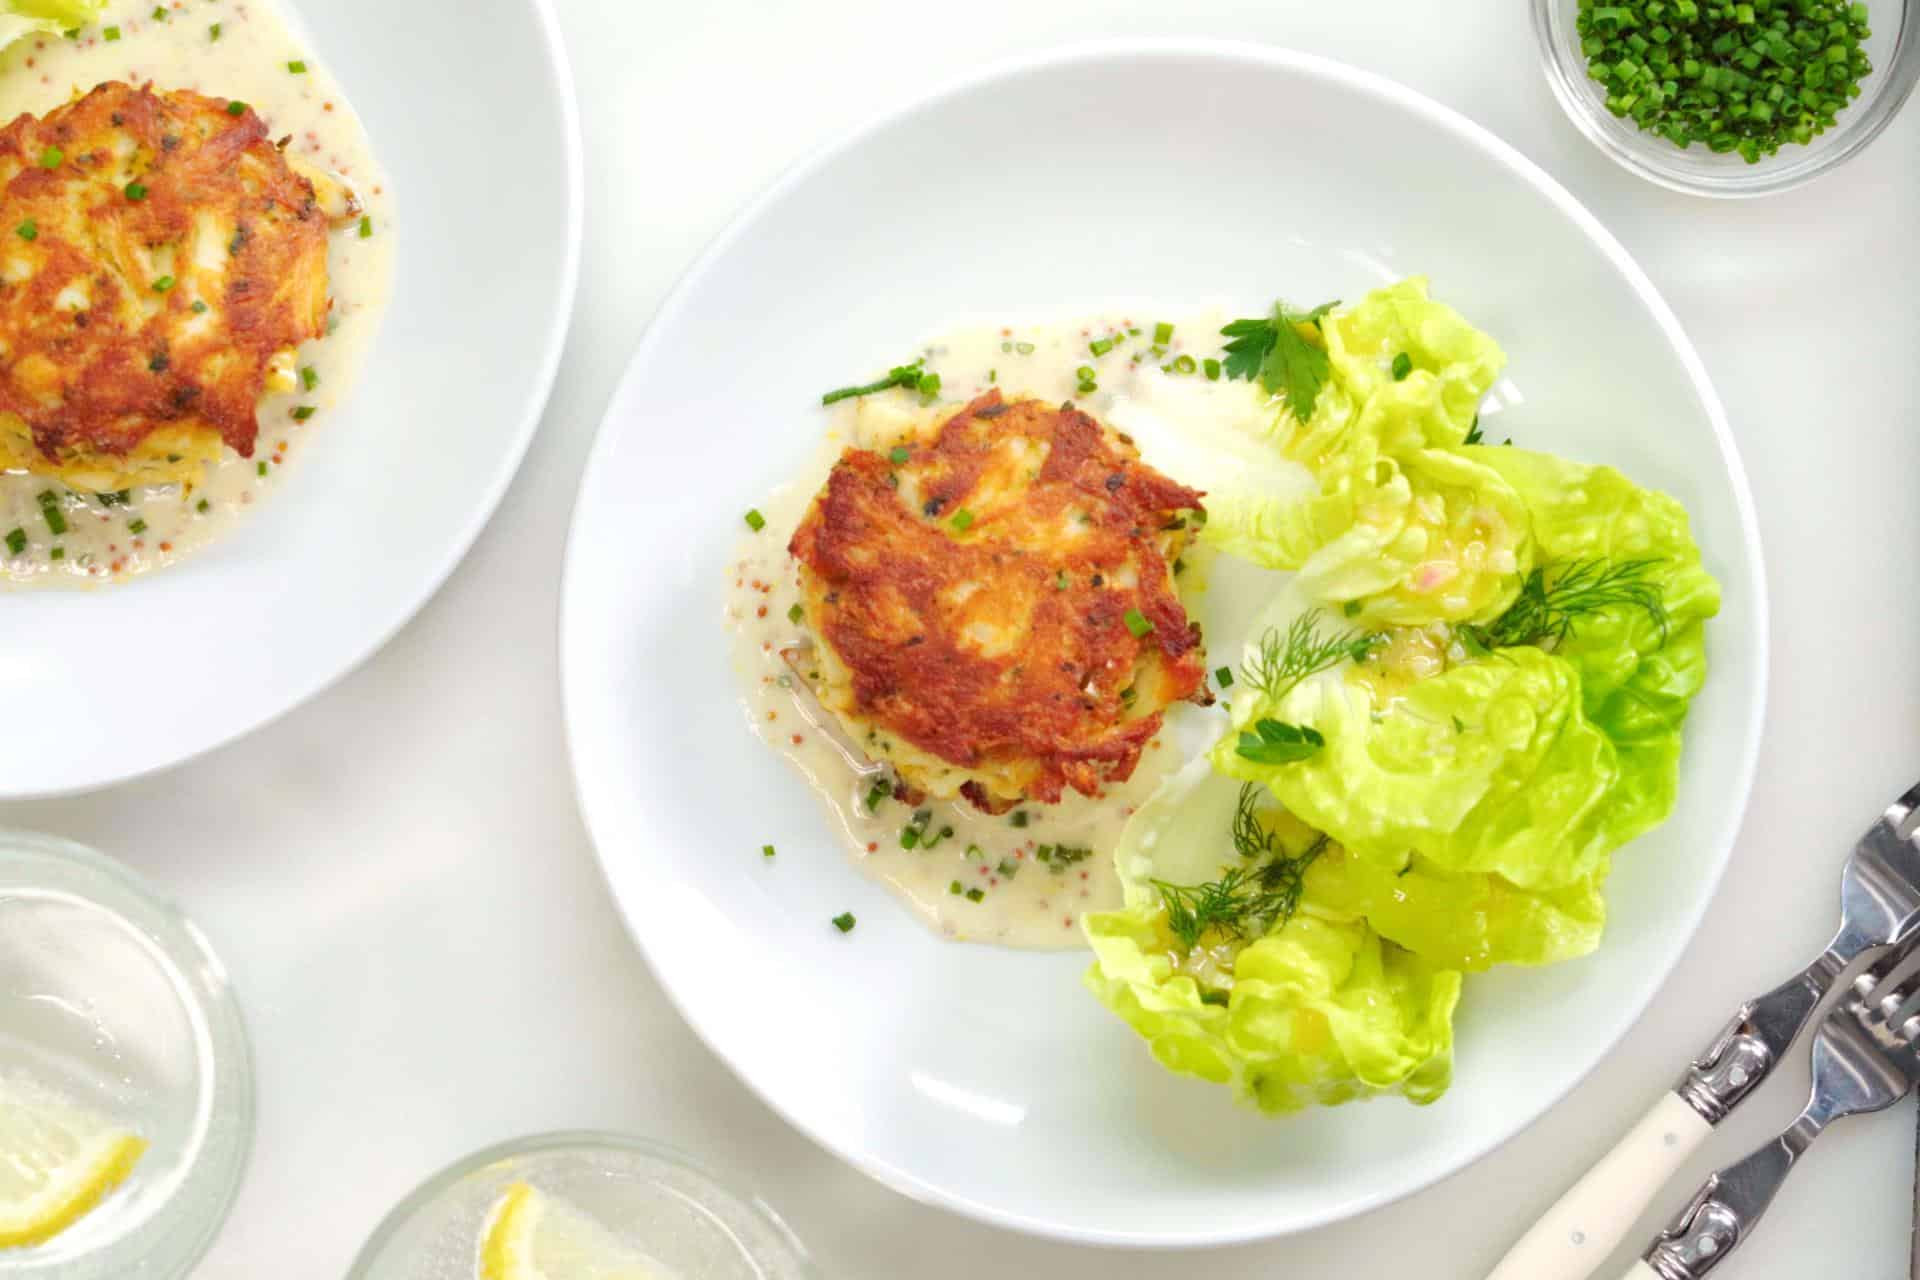 Crab Cakes With A Creamy Mustard-Chive Sauce